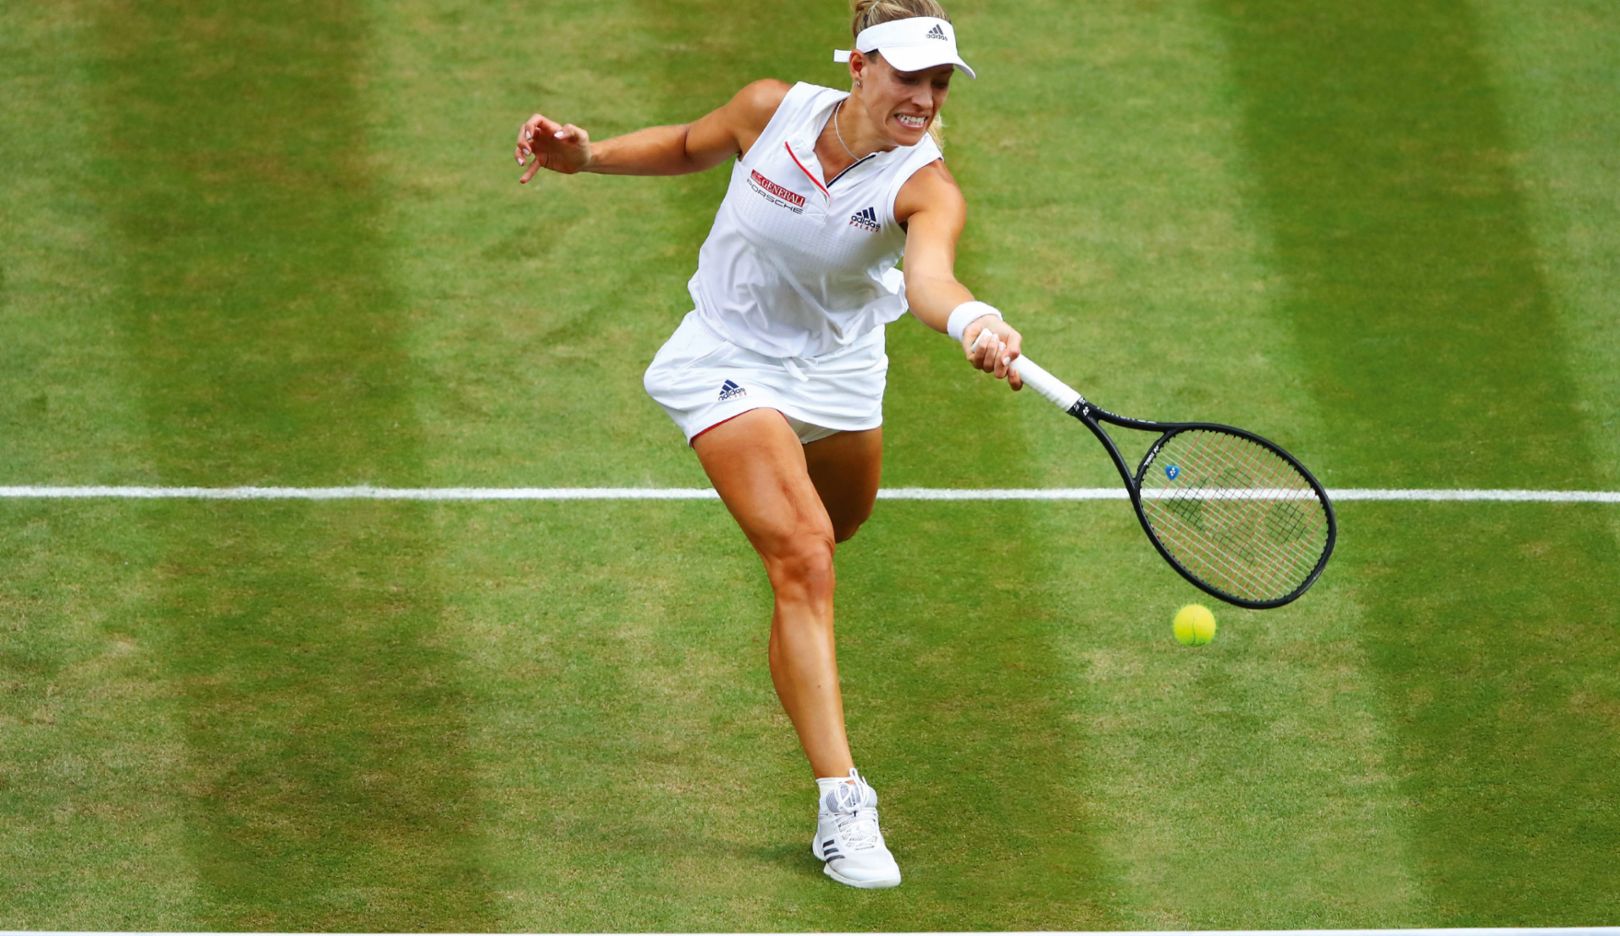 Angelique Kerber’s play is analyzed: